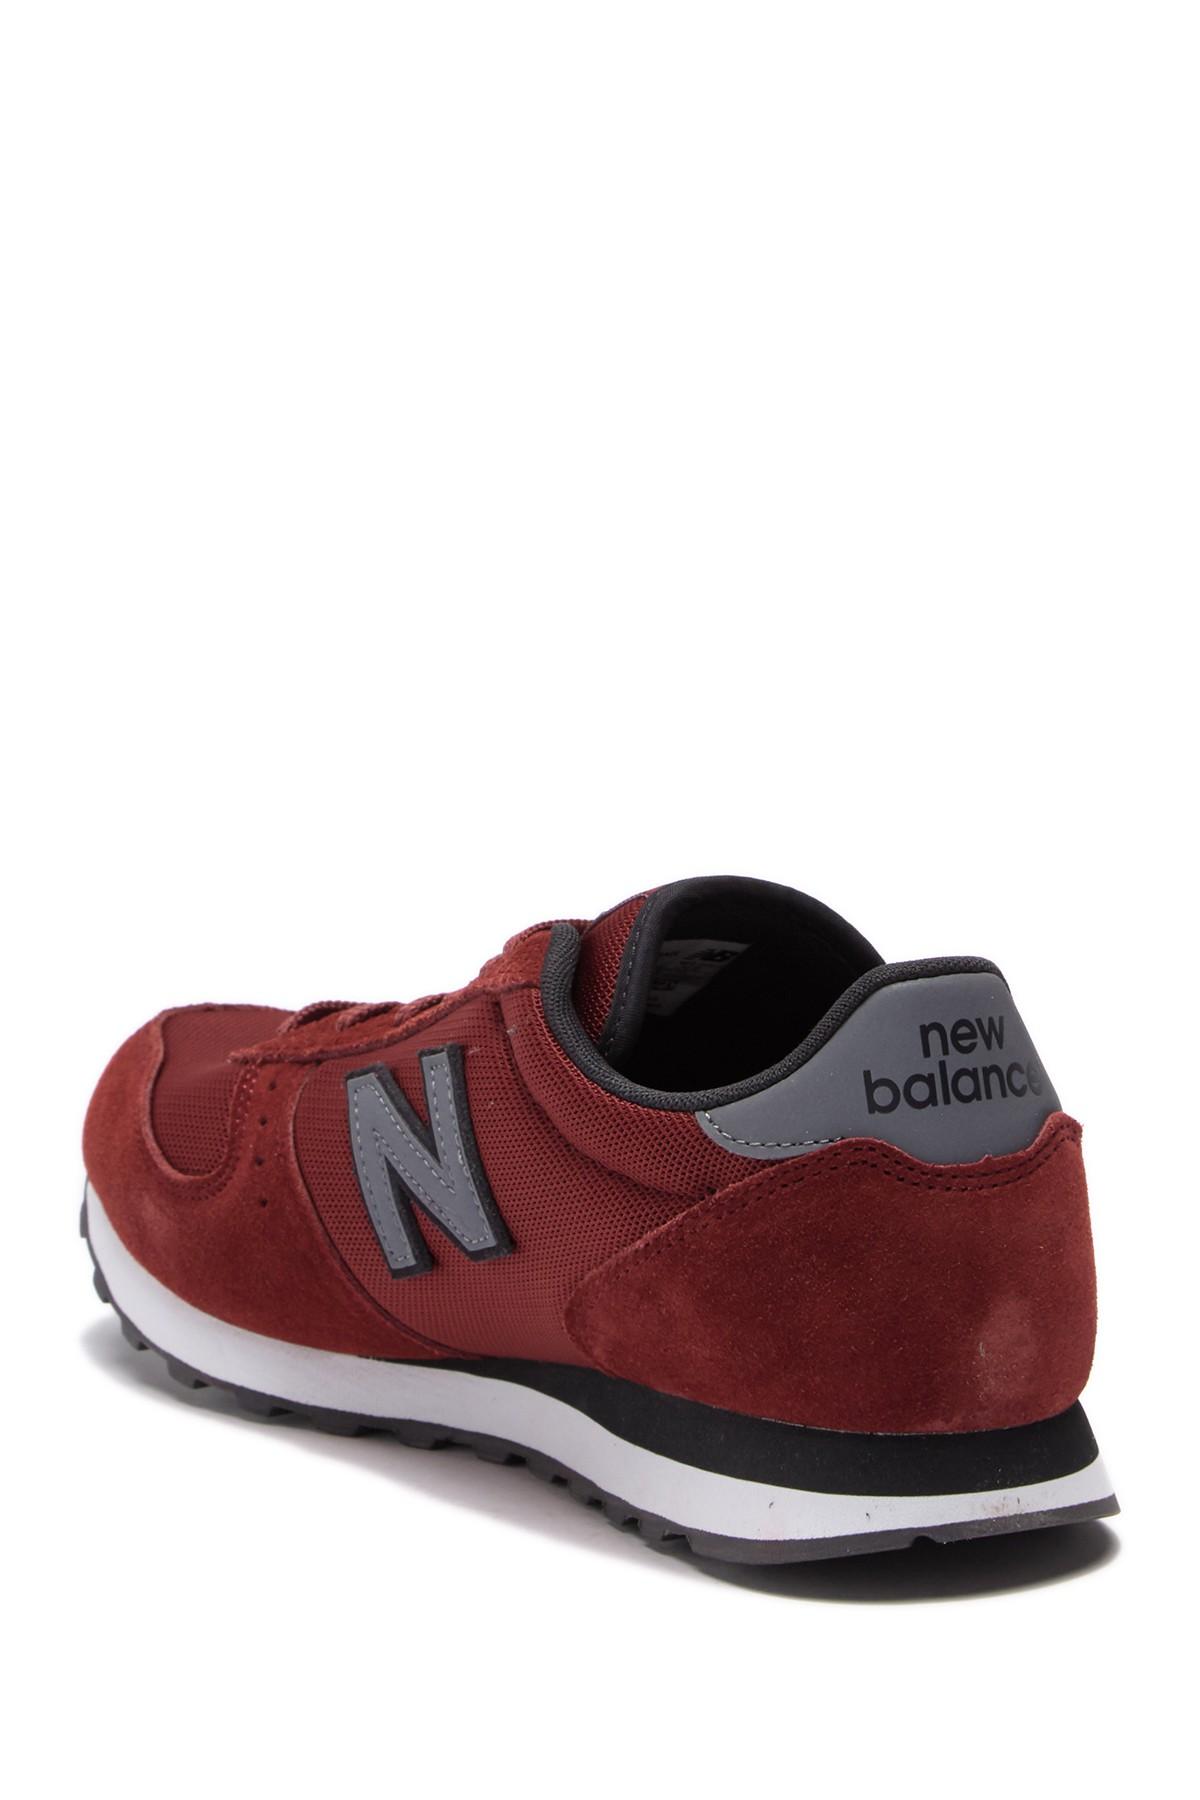 New Balance Suede 311 Classic Sneaker 